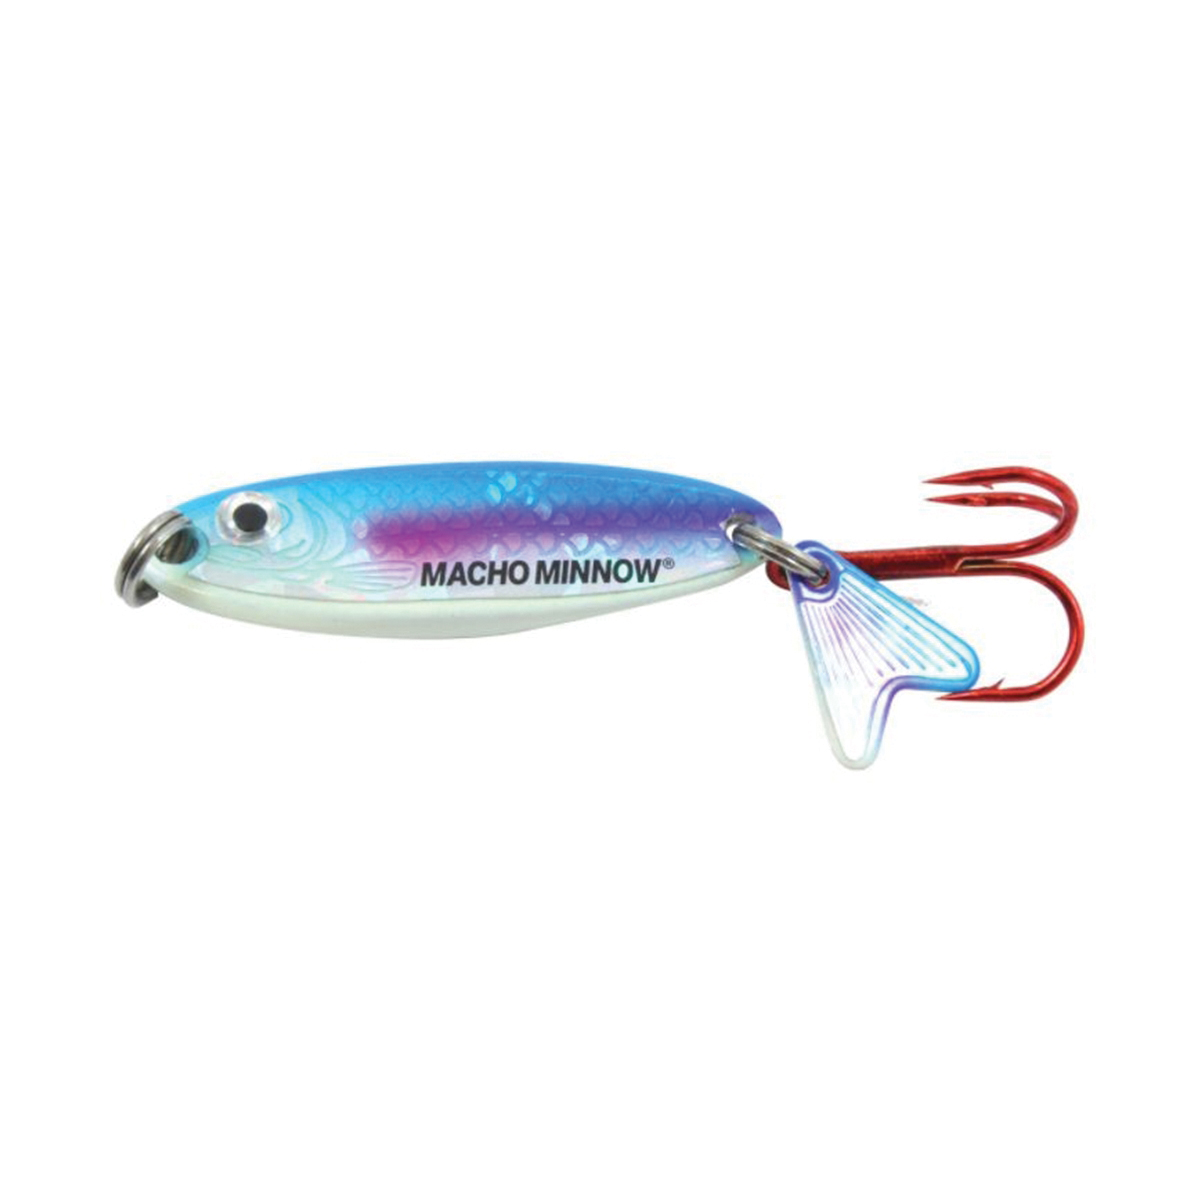 Northland - High quality fishing lures